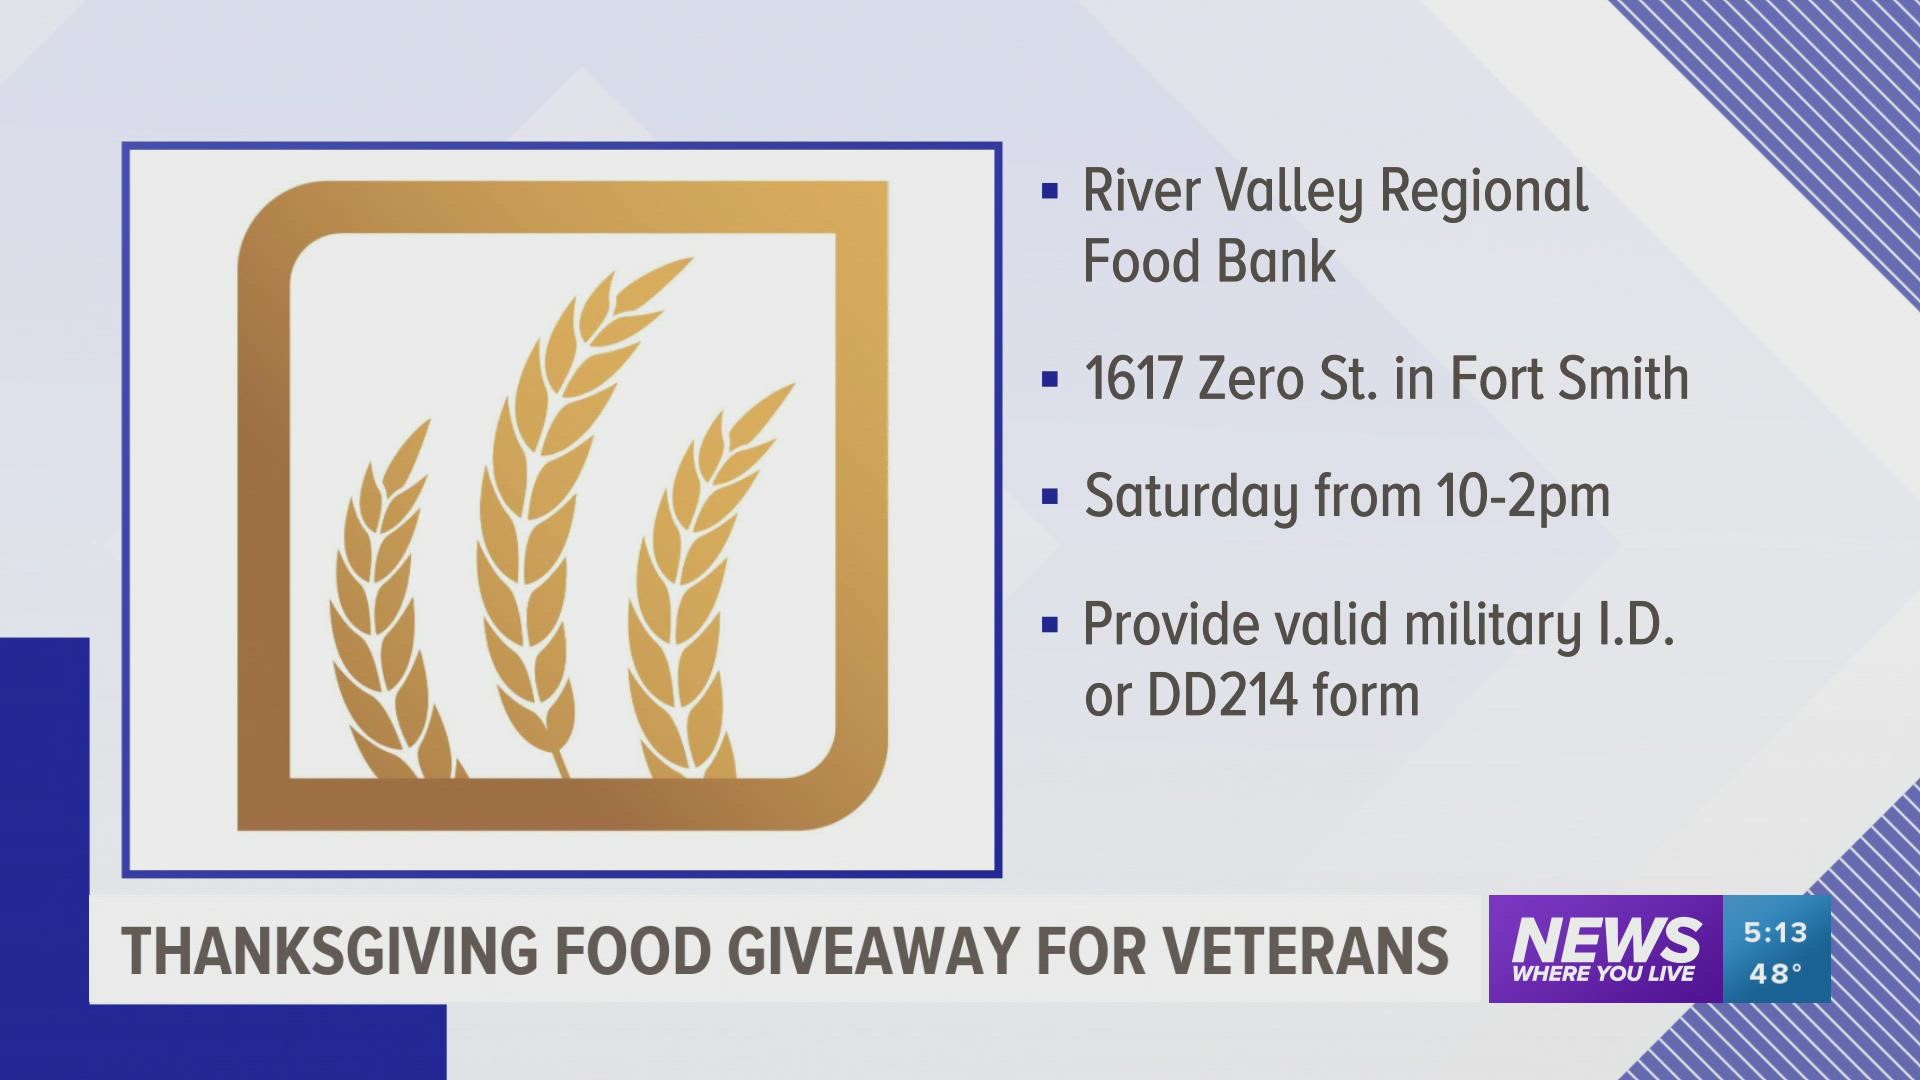 Veterans will receive a box of food for a Thanksgiving meal, including ham, milk and dog food.